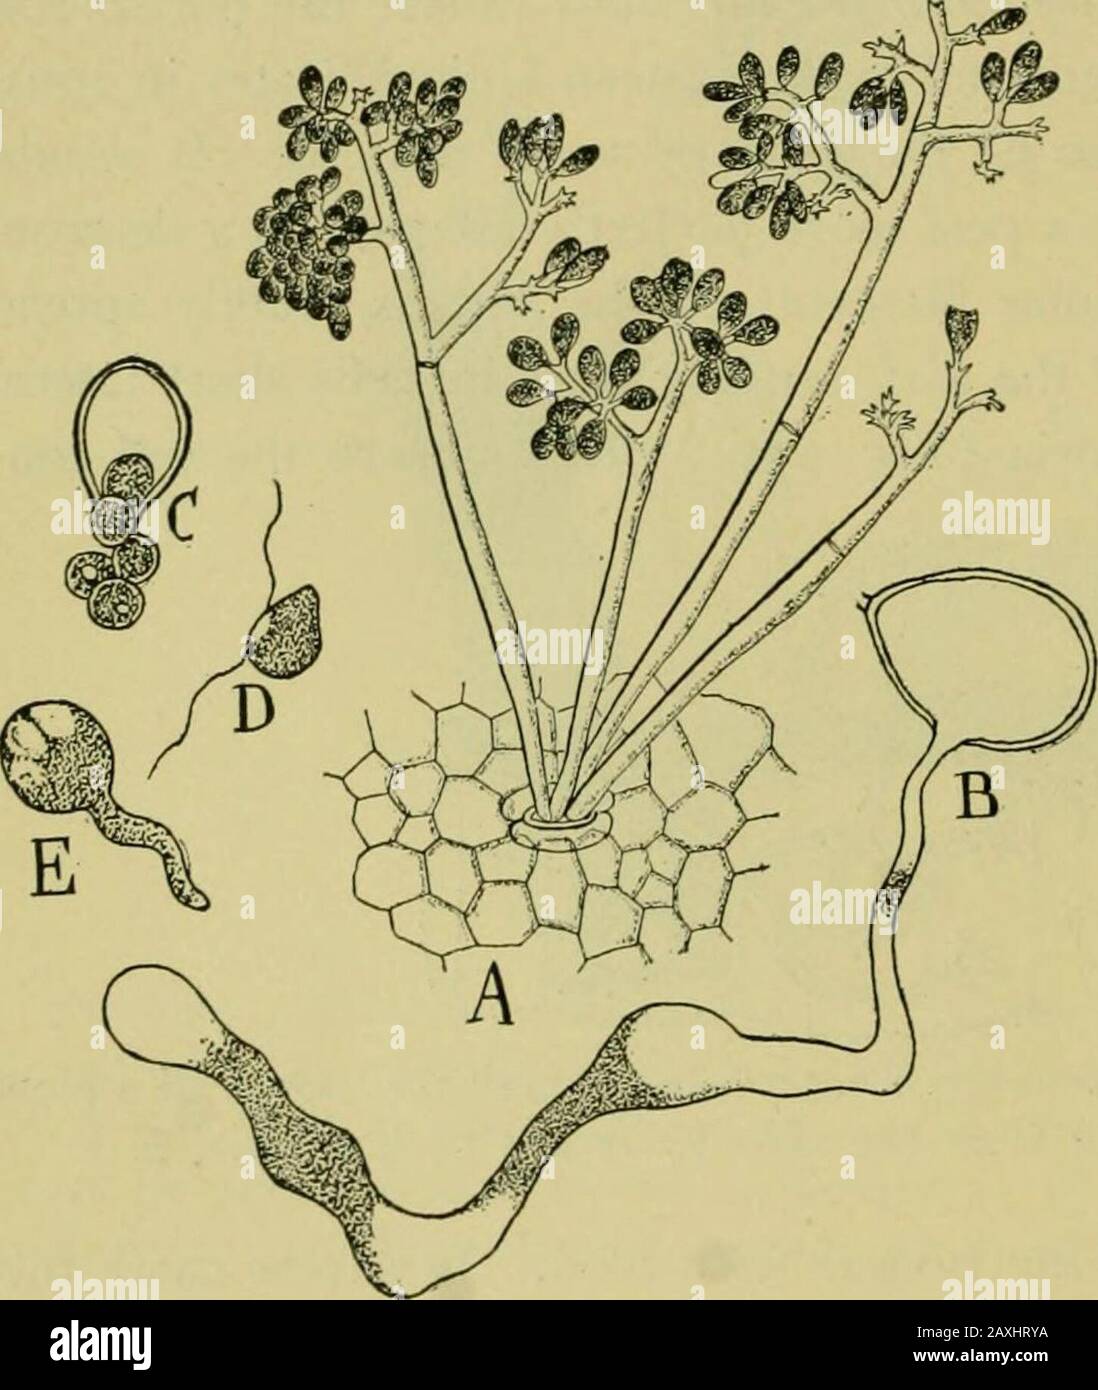 Nature and development of plants . ecayin bad cases of infection. When the mycelium has become wellestablished in the leaf, numerous branching hyphae extend outthrough the stomata and form at their tips little sacs or sporangia(Fig. 132, A). The formation of the sporangia is effected in afew hours, when they drop off and are carried by the wind toother plants, where they germinate at once, forming a tube thatpenetrates the leaf and rapidly spreads the disease. If the spor-angia chance to fall upon leaves that are wet by dew or rain, the 2oo REPRODUCTION OF DOWNY MILDEWS contents breaks up into Stock Photo